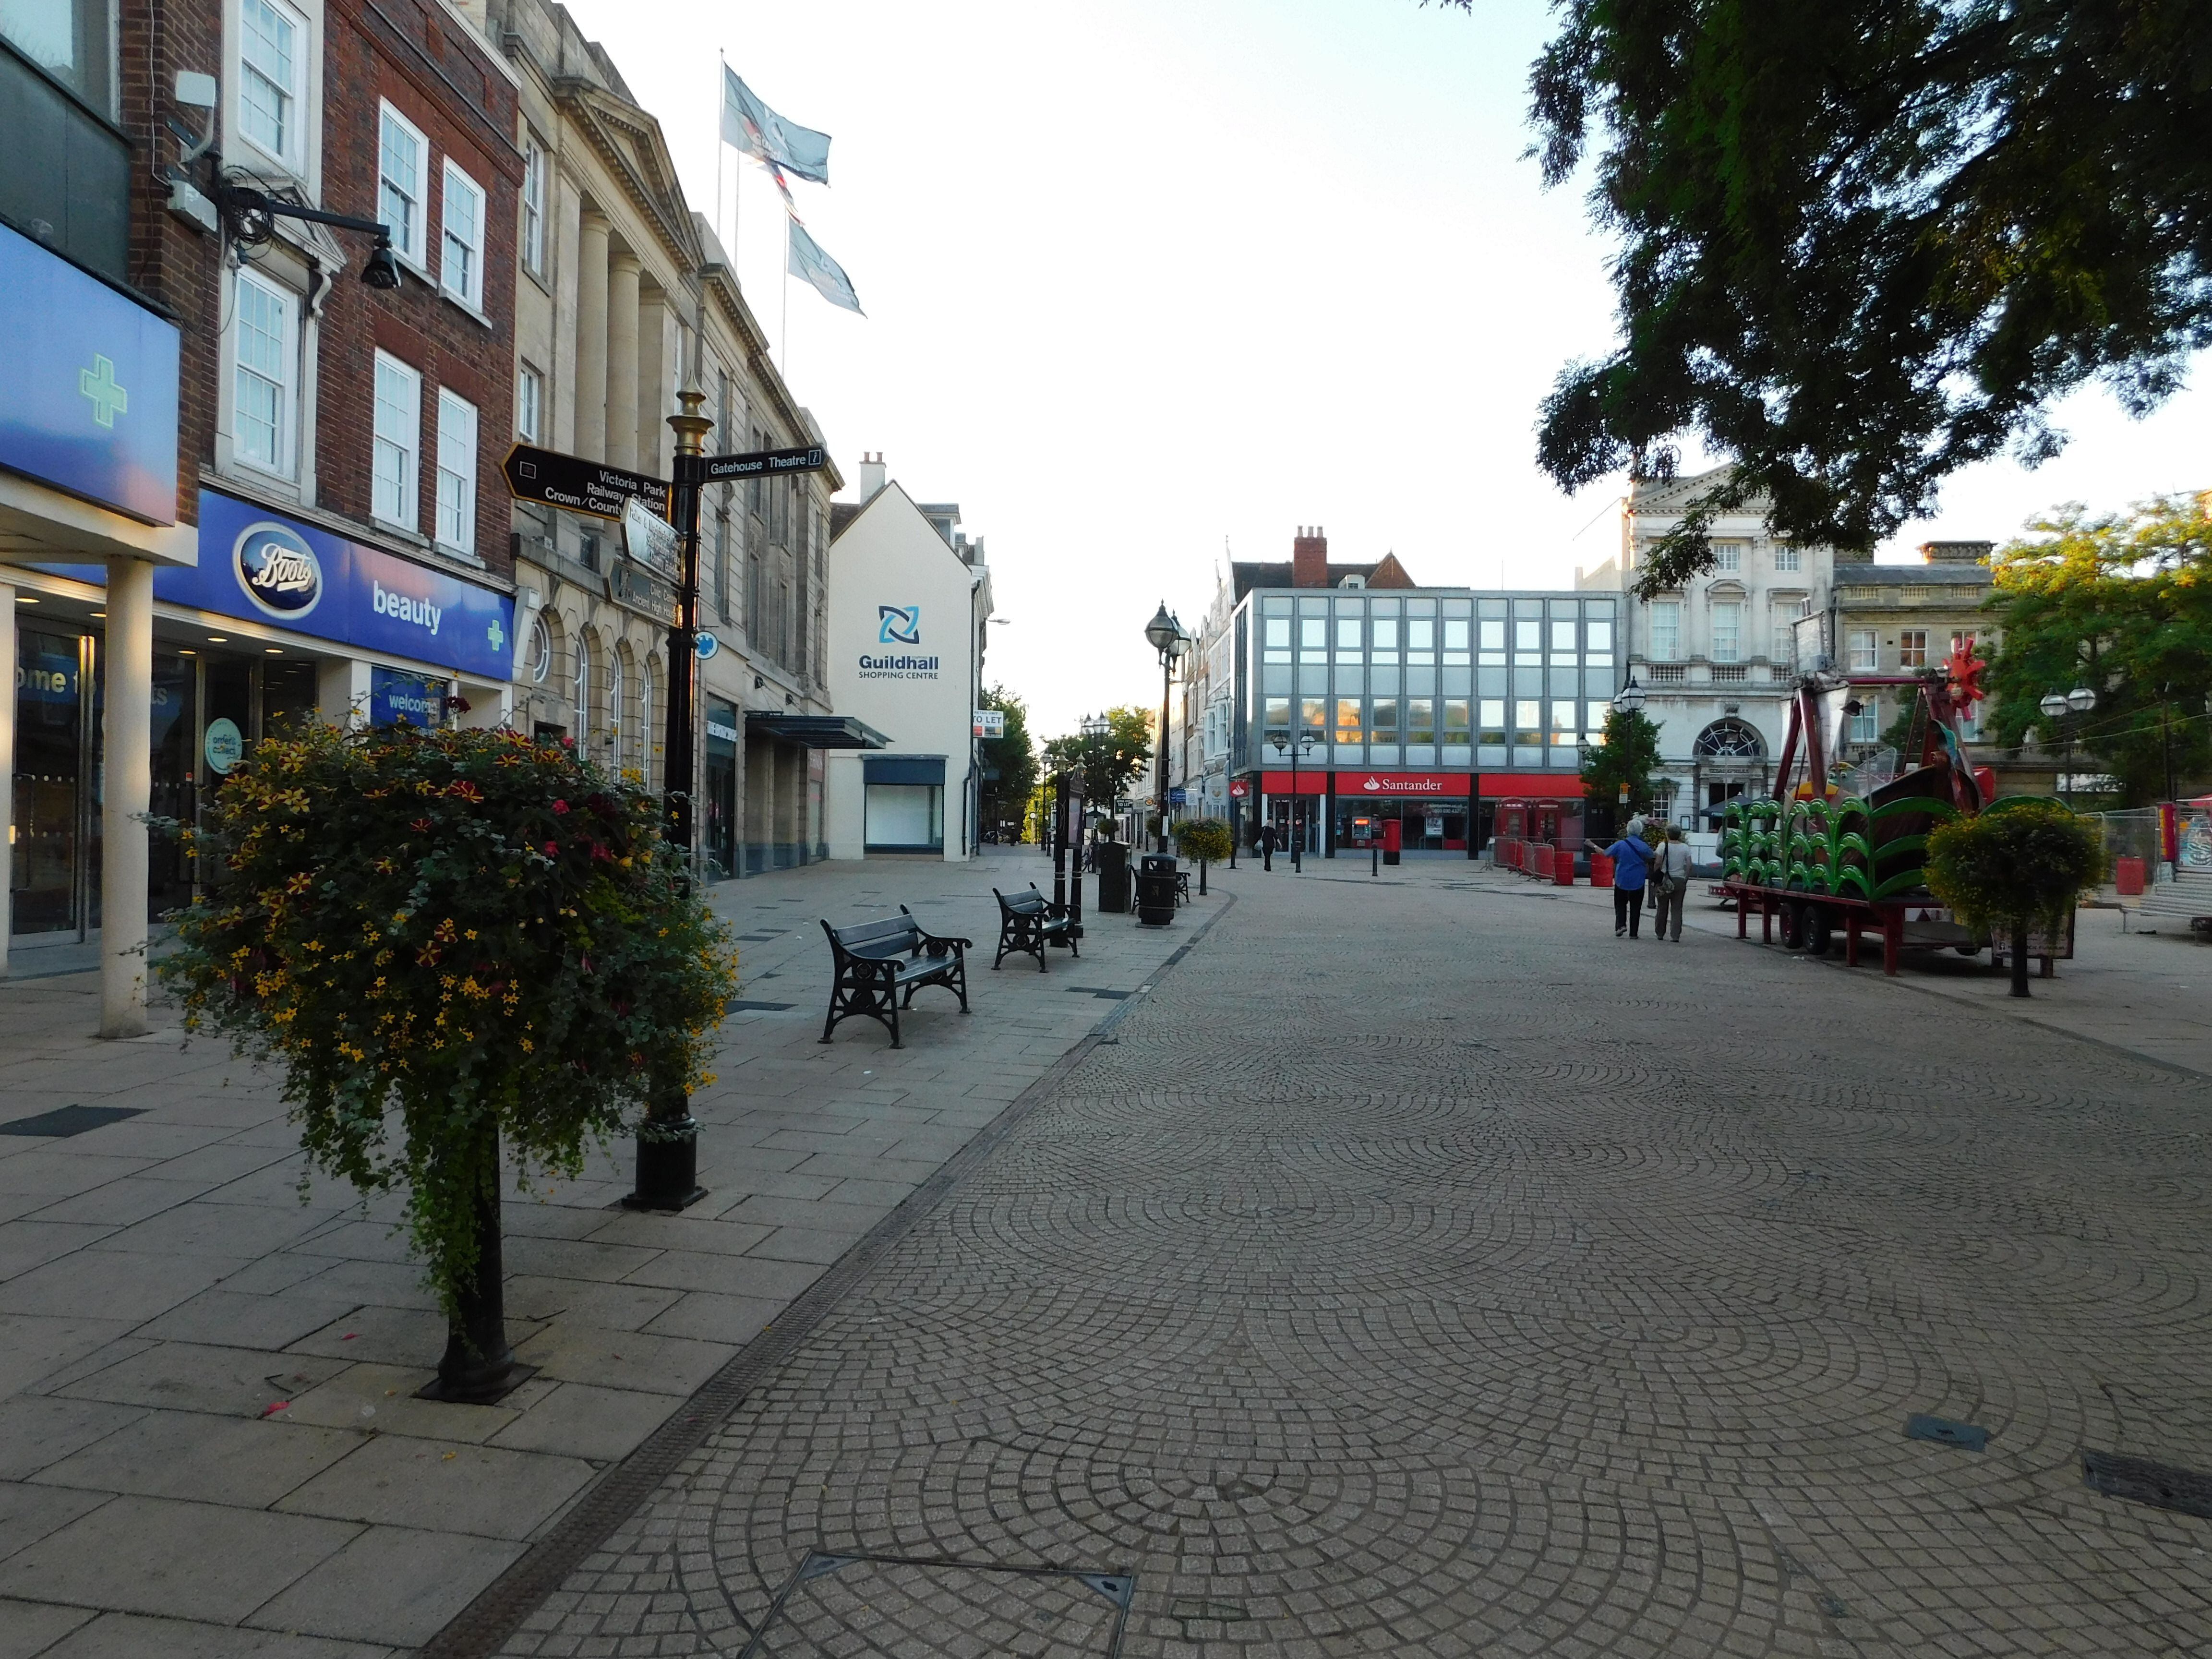 Busker amplifier and bird-feeding bans for two Staffordshire town centres proposed